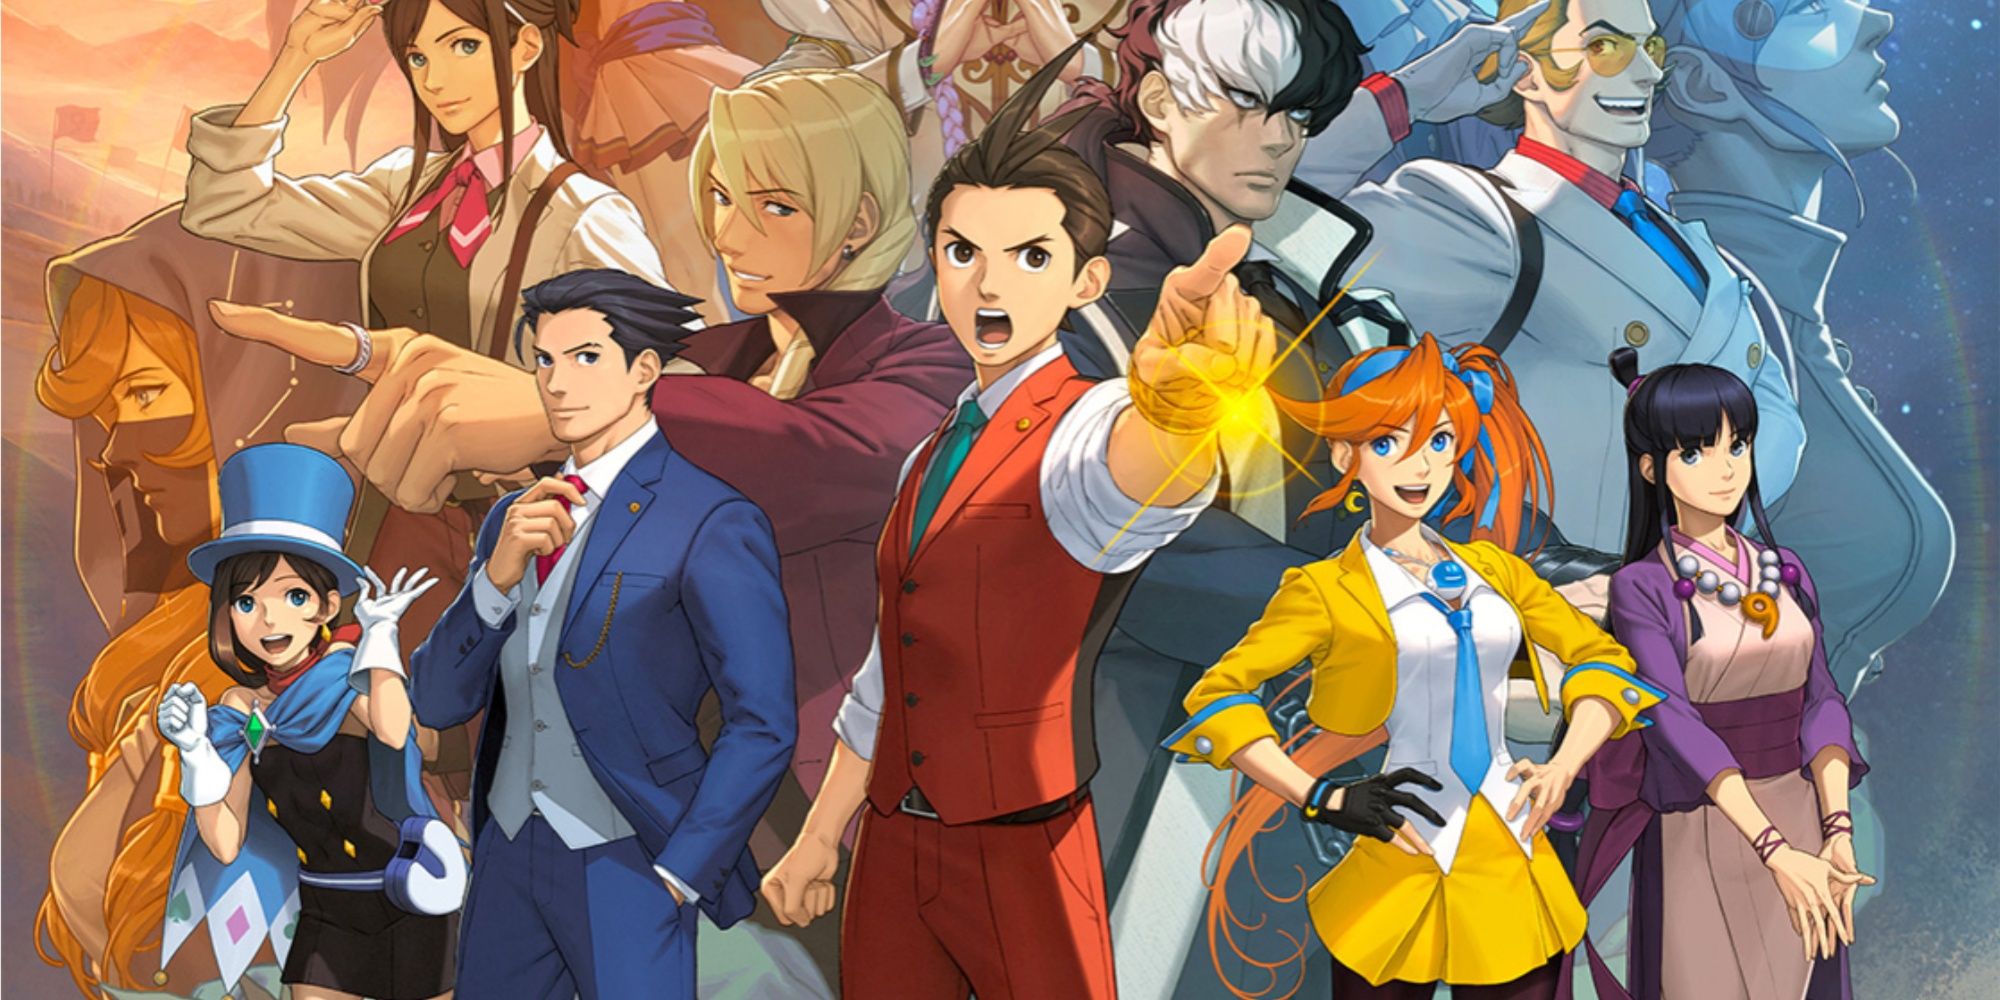 TAKE THAT! Phoenix Wright: Ace Attorney smashes the prosecution!